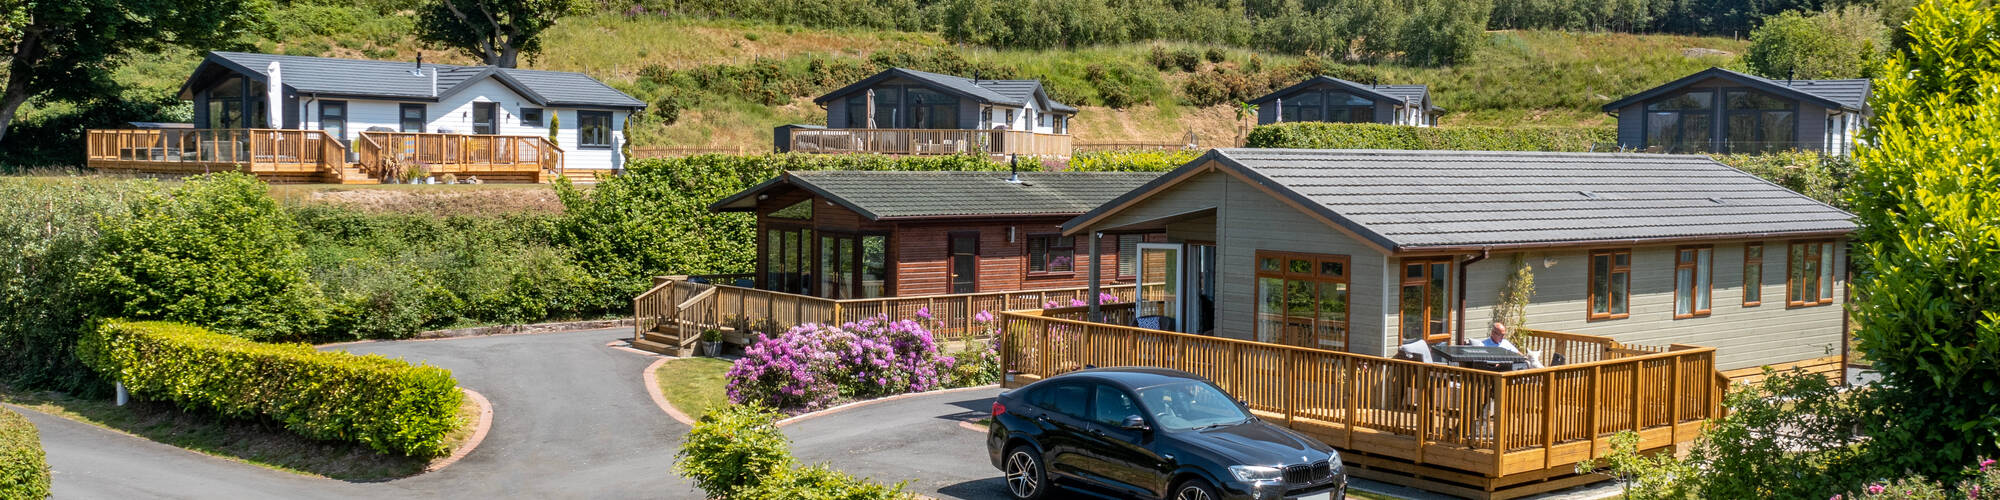 UK Lodge for sale in Wales